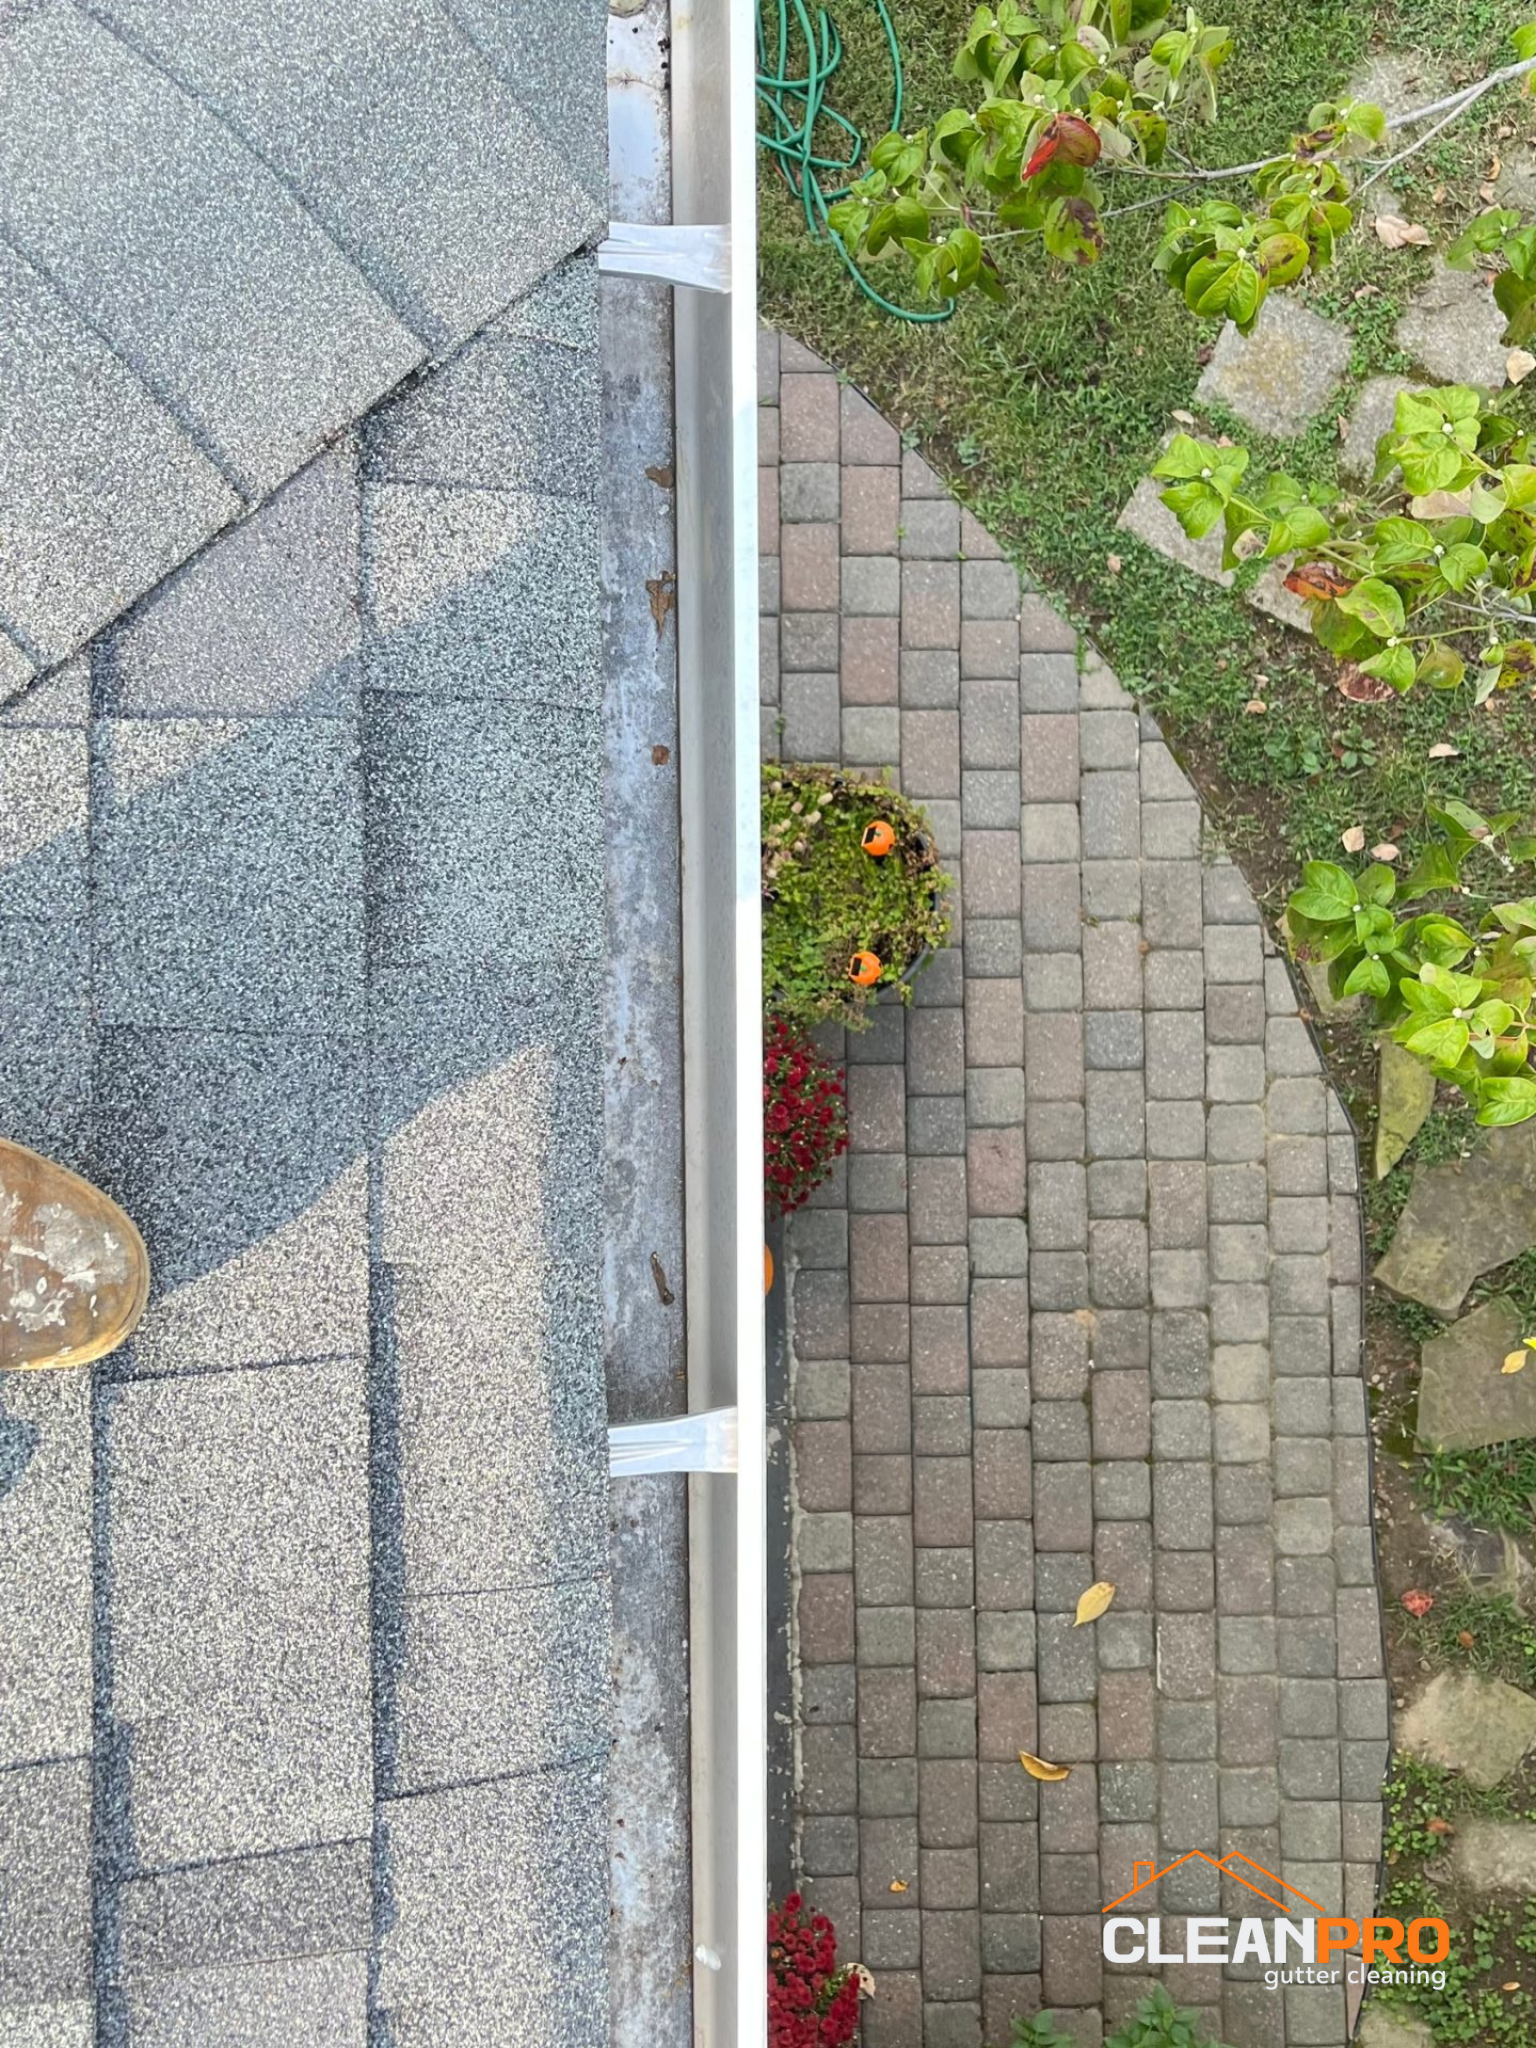 Quality Gutter Cleaning in Orlando FL